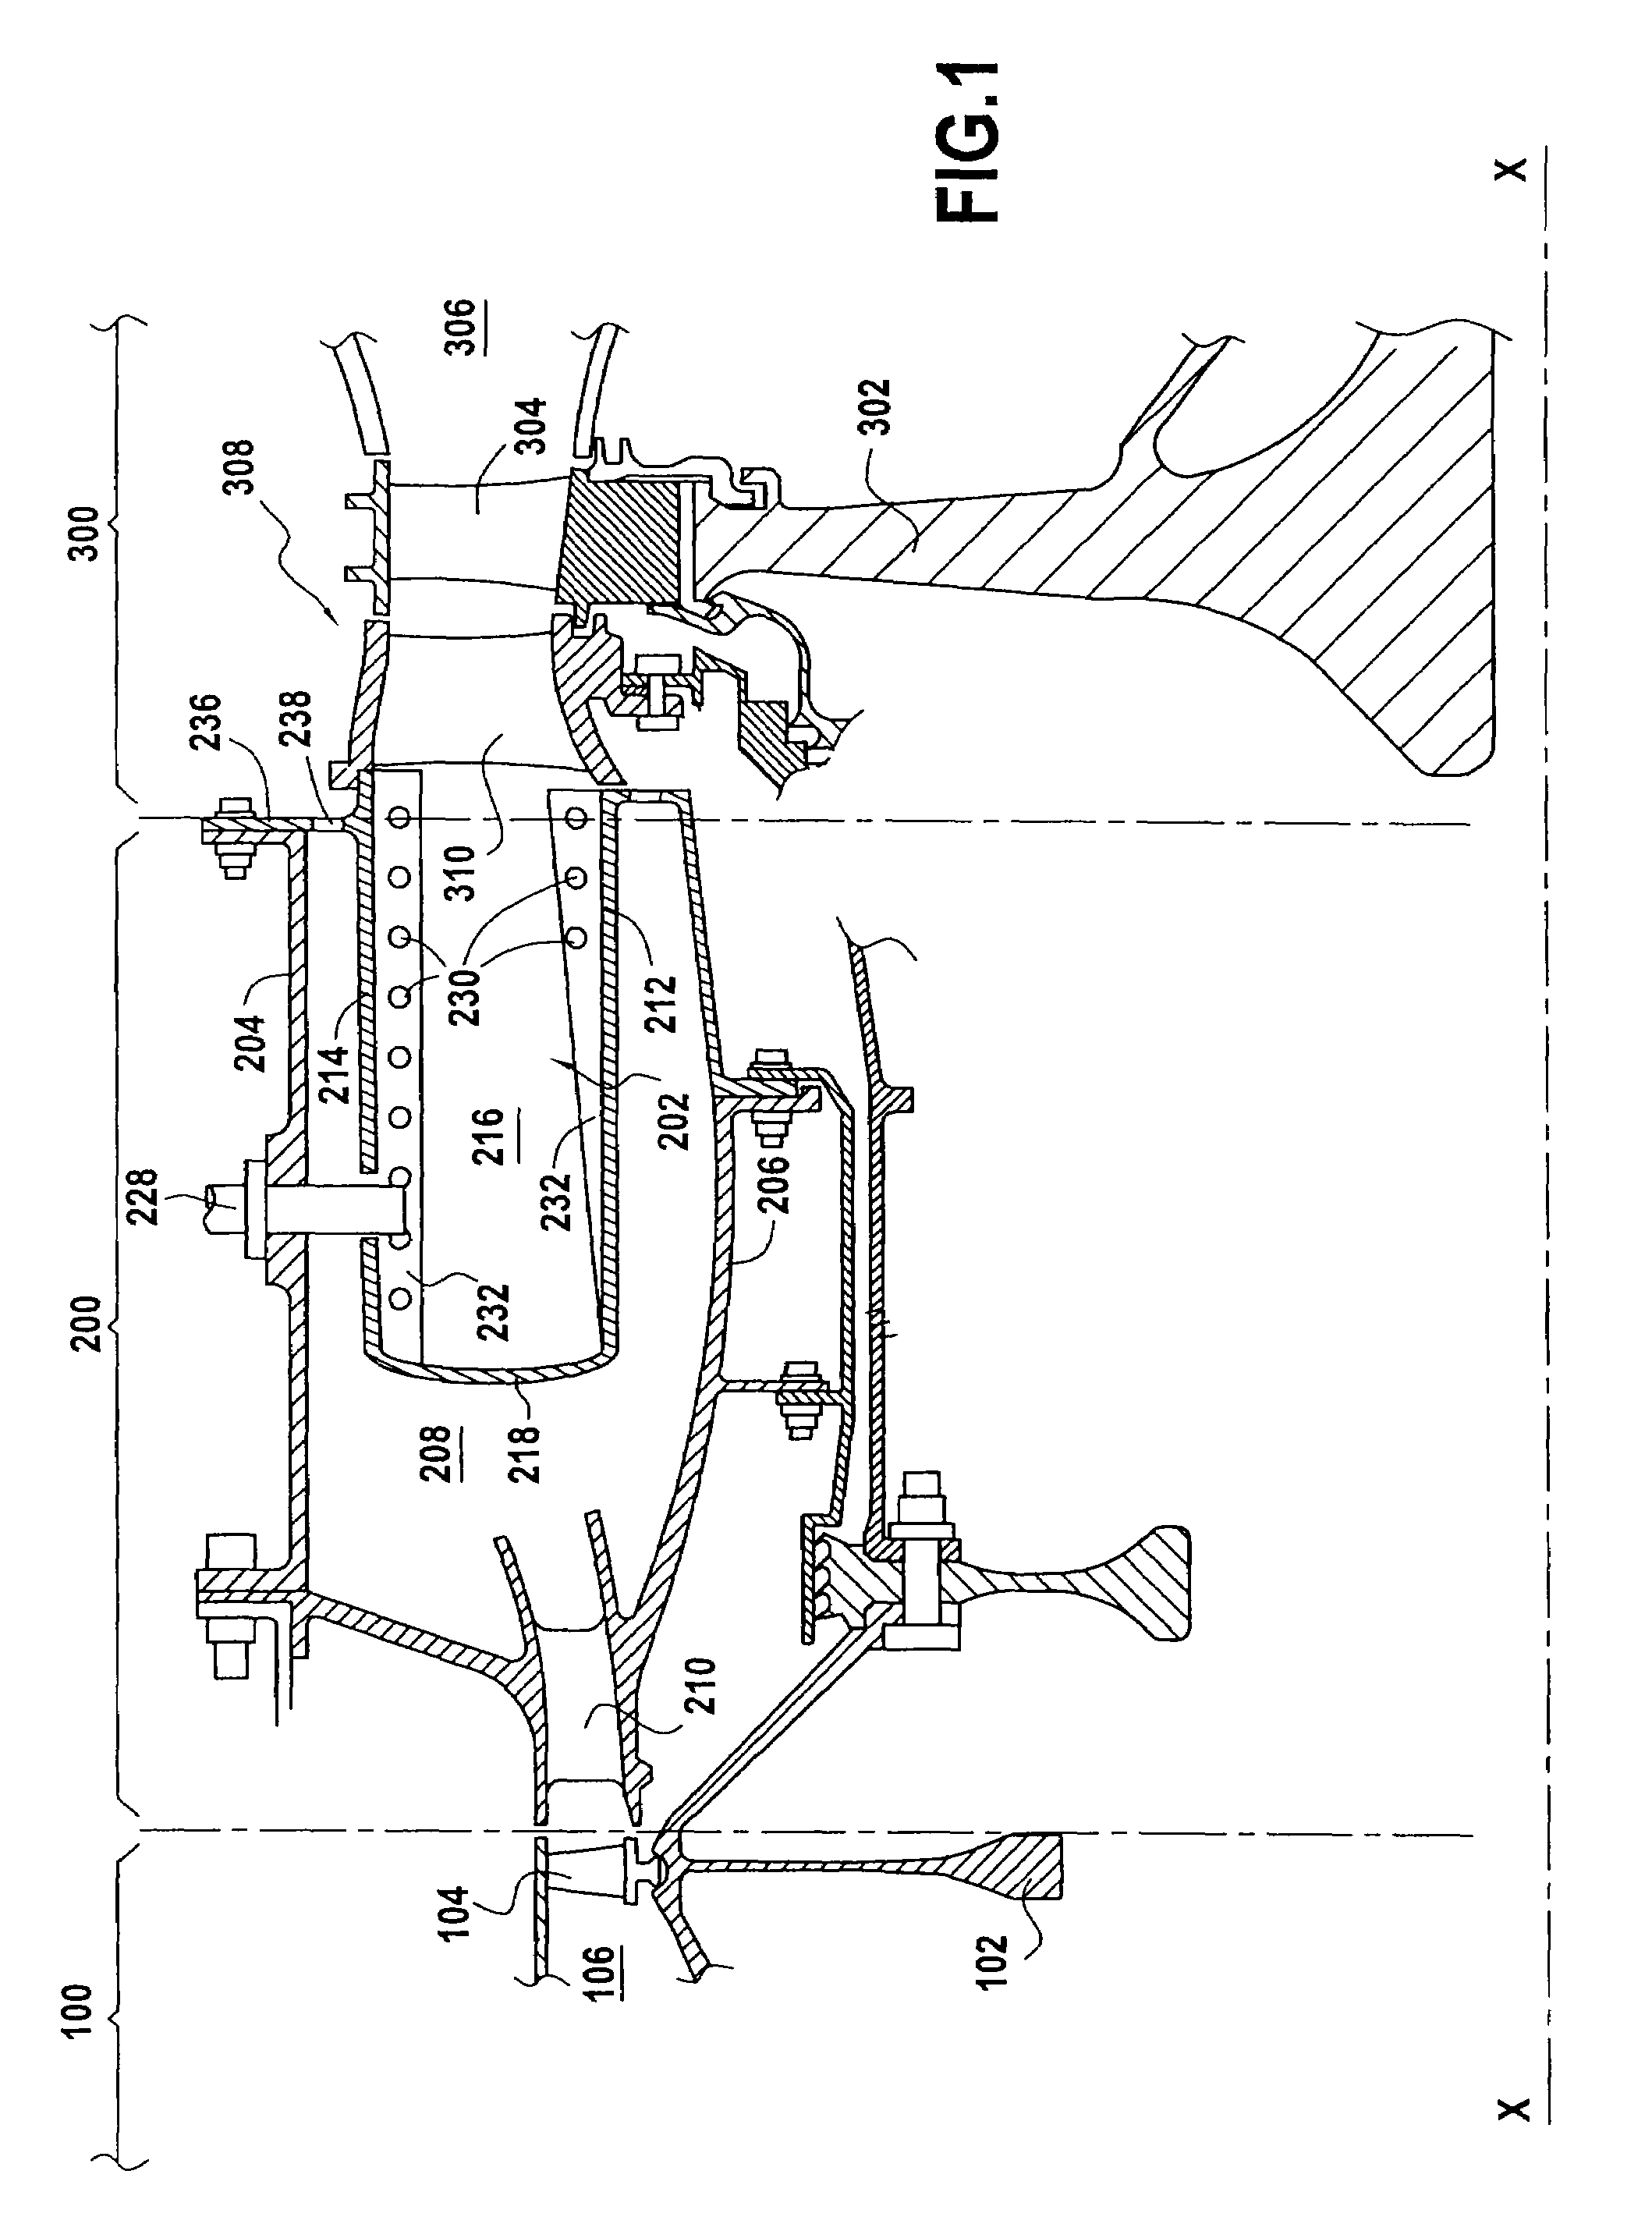 Turbomachine combustion chamber with helical air flow